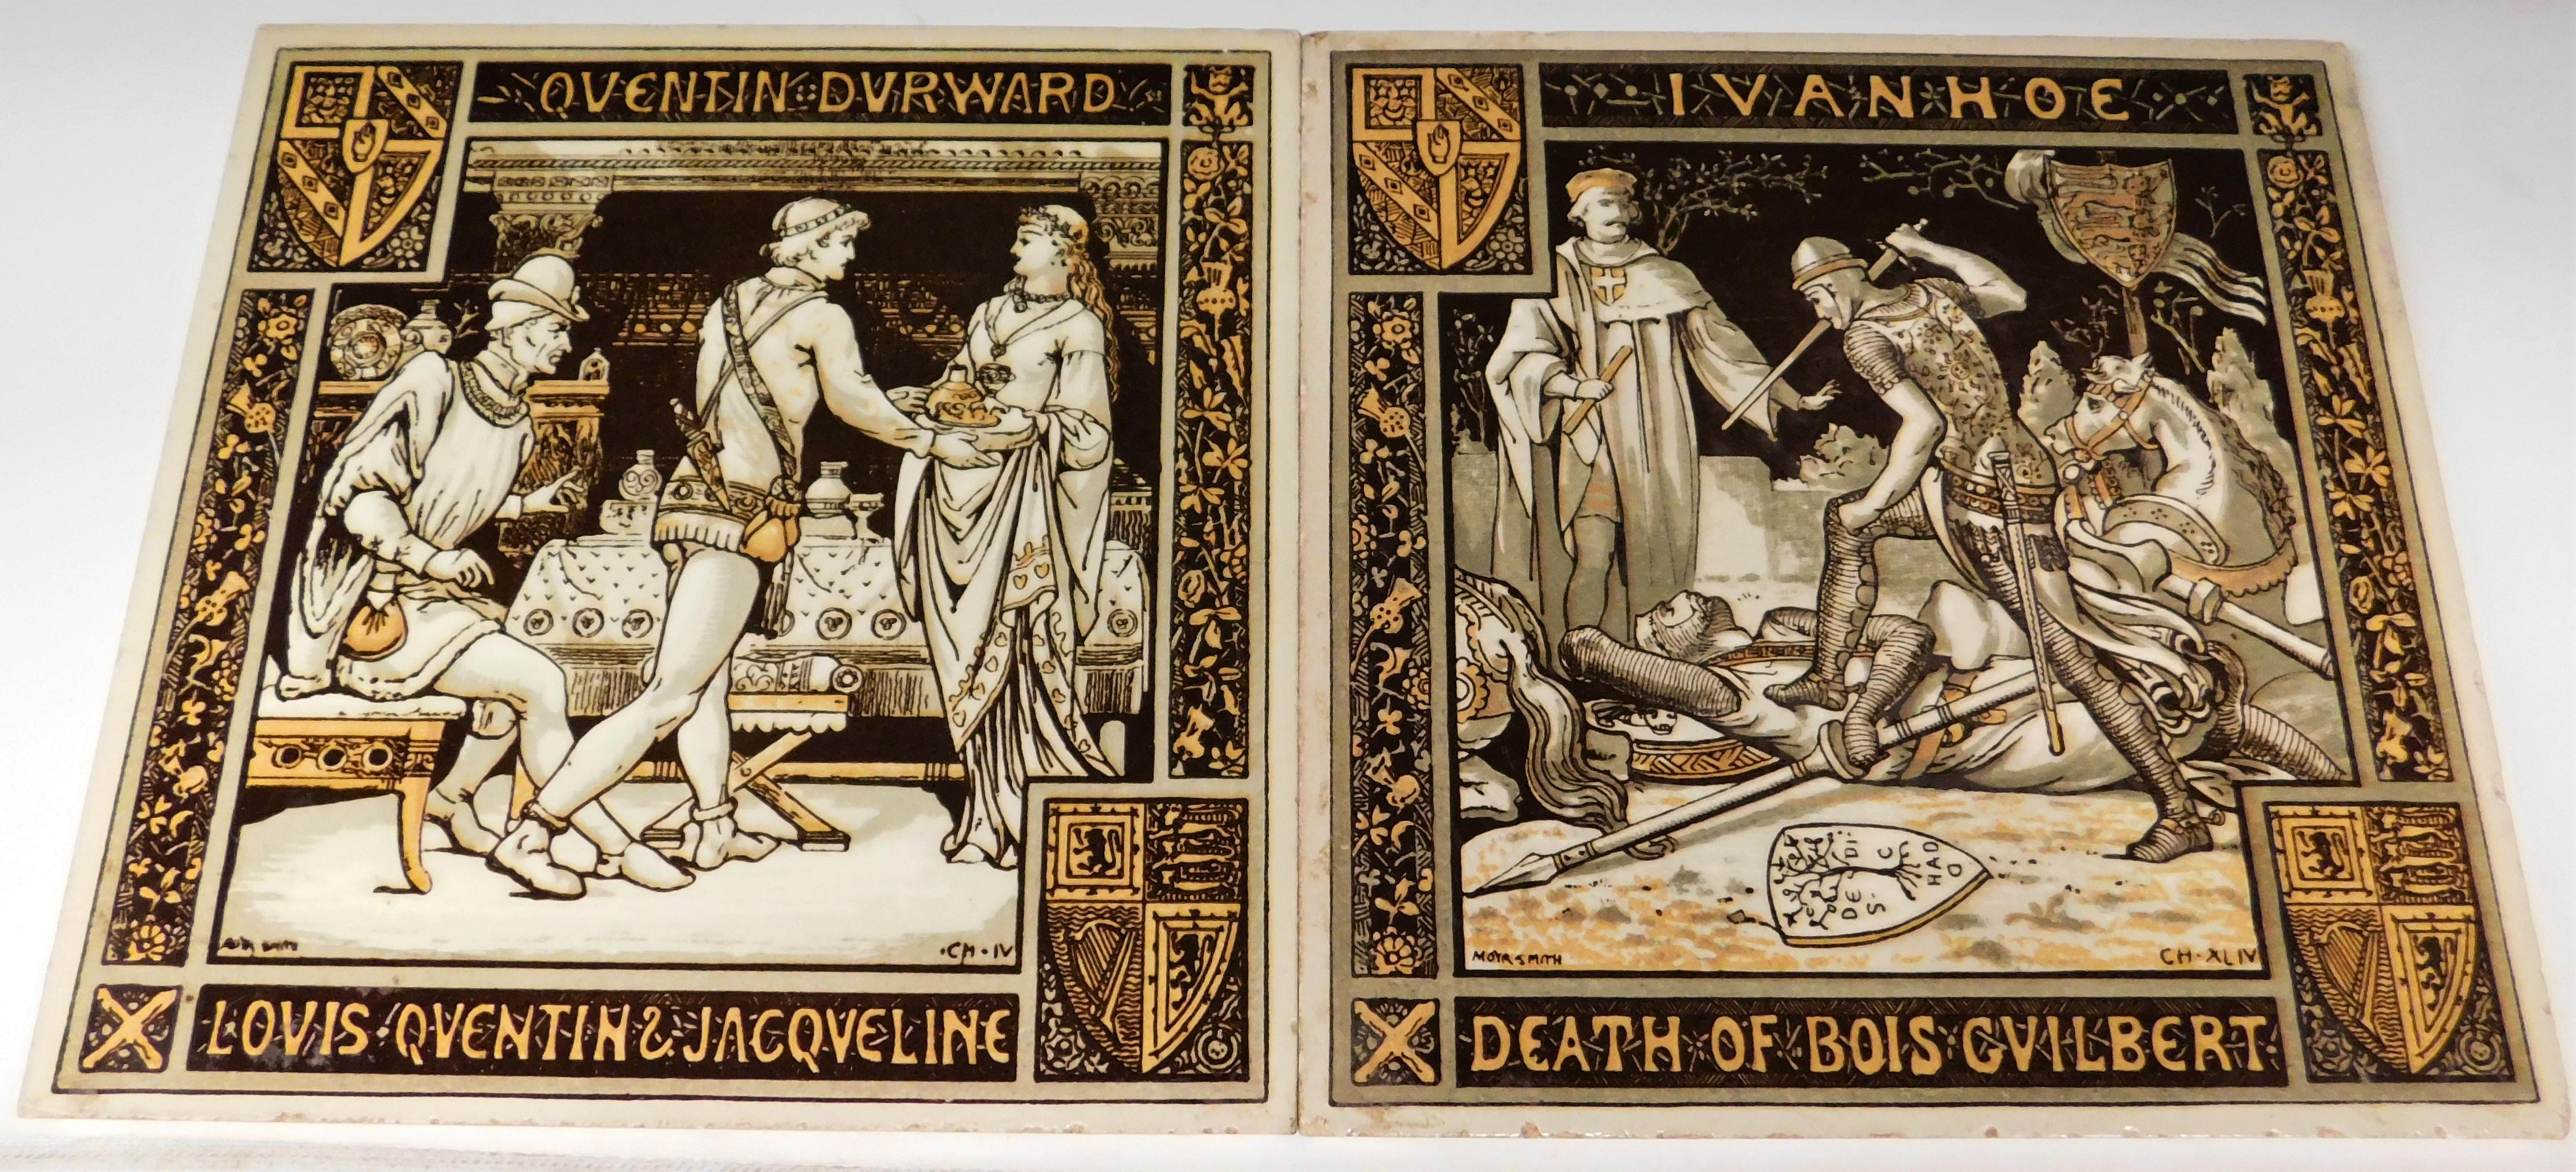 A pair of large Victorian hand painted Minton China Works in Stoke-upon-Trent, England, English tiles based on Scott's popular Waverly Novels, designed by John Moyr Smith. Earthenware tiles, dust-pressed cream body, transfer-printed in black and